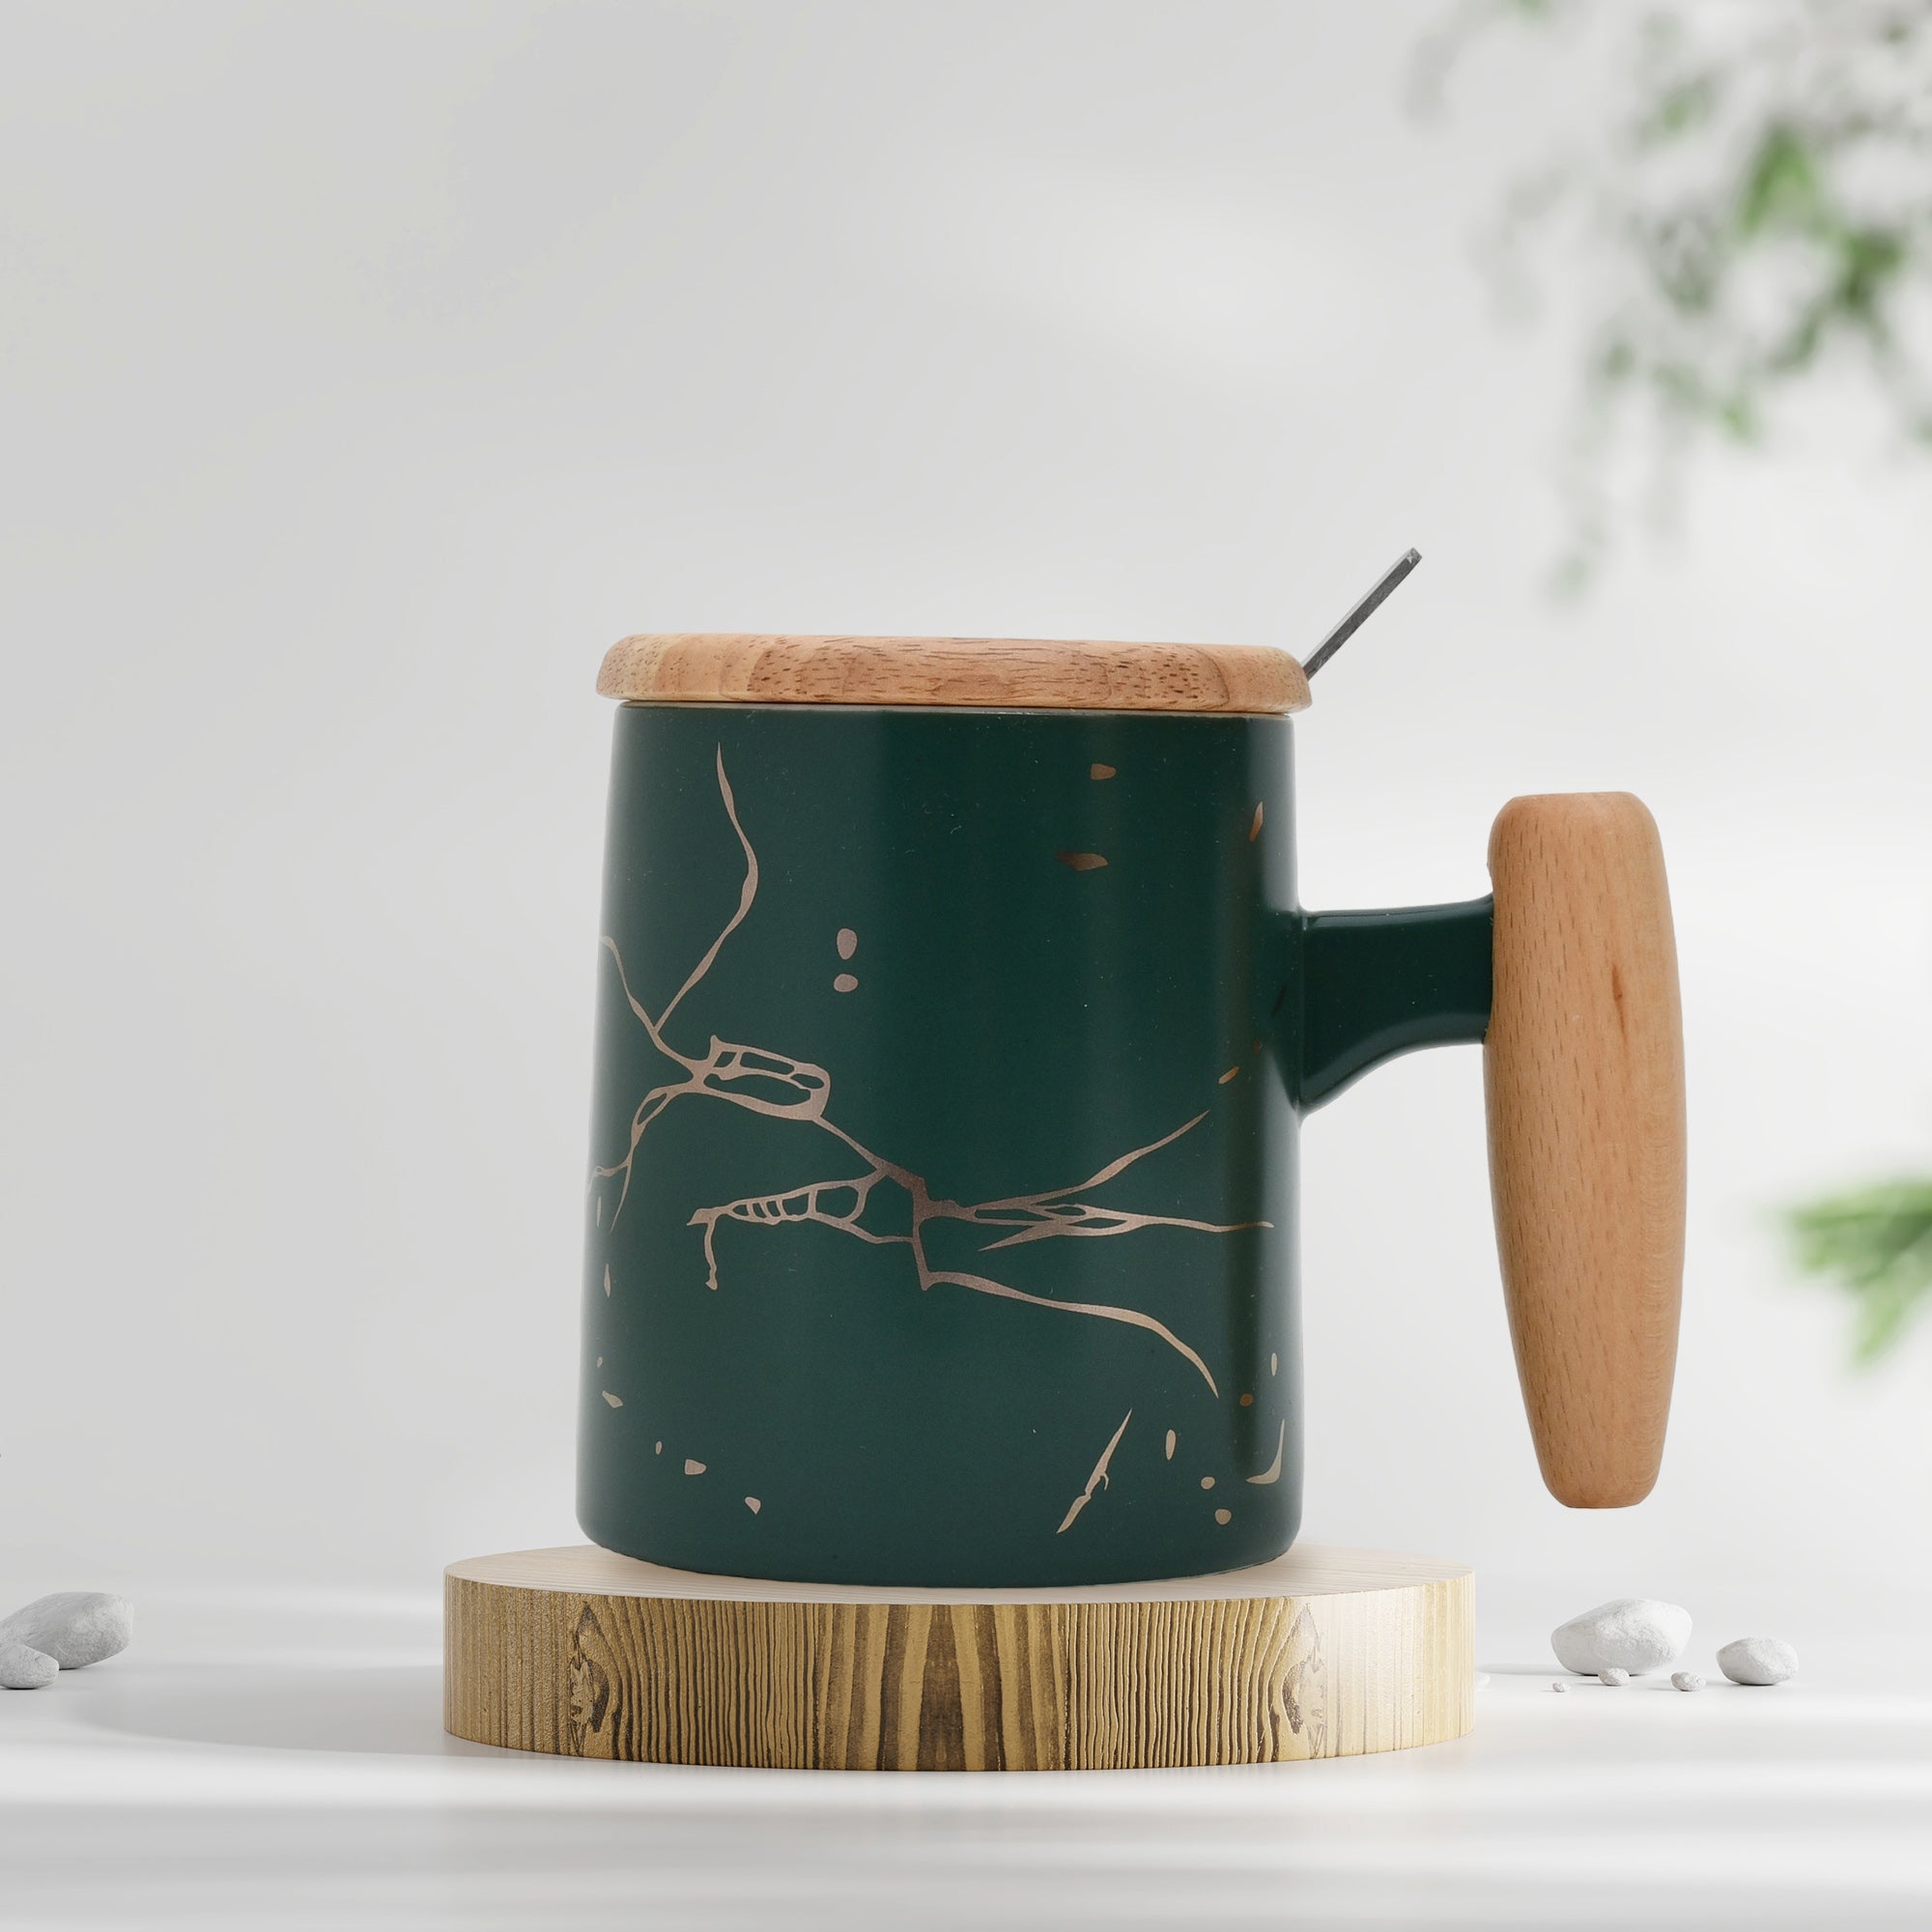 Be Creative And Add A Personal Touch To Your Coffee Mug With Nail Polish  Decoration – TheCommonsCafe